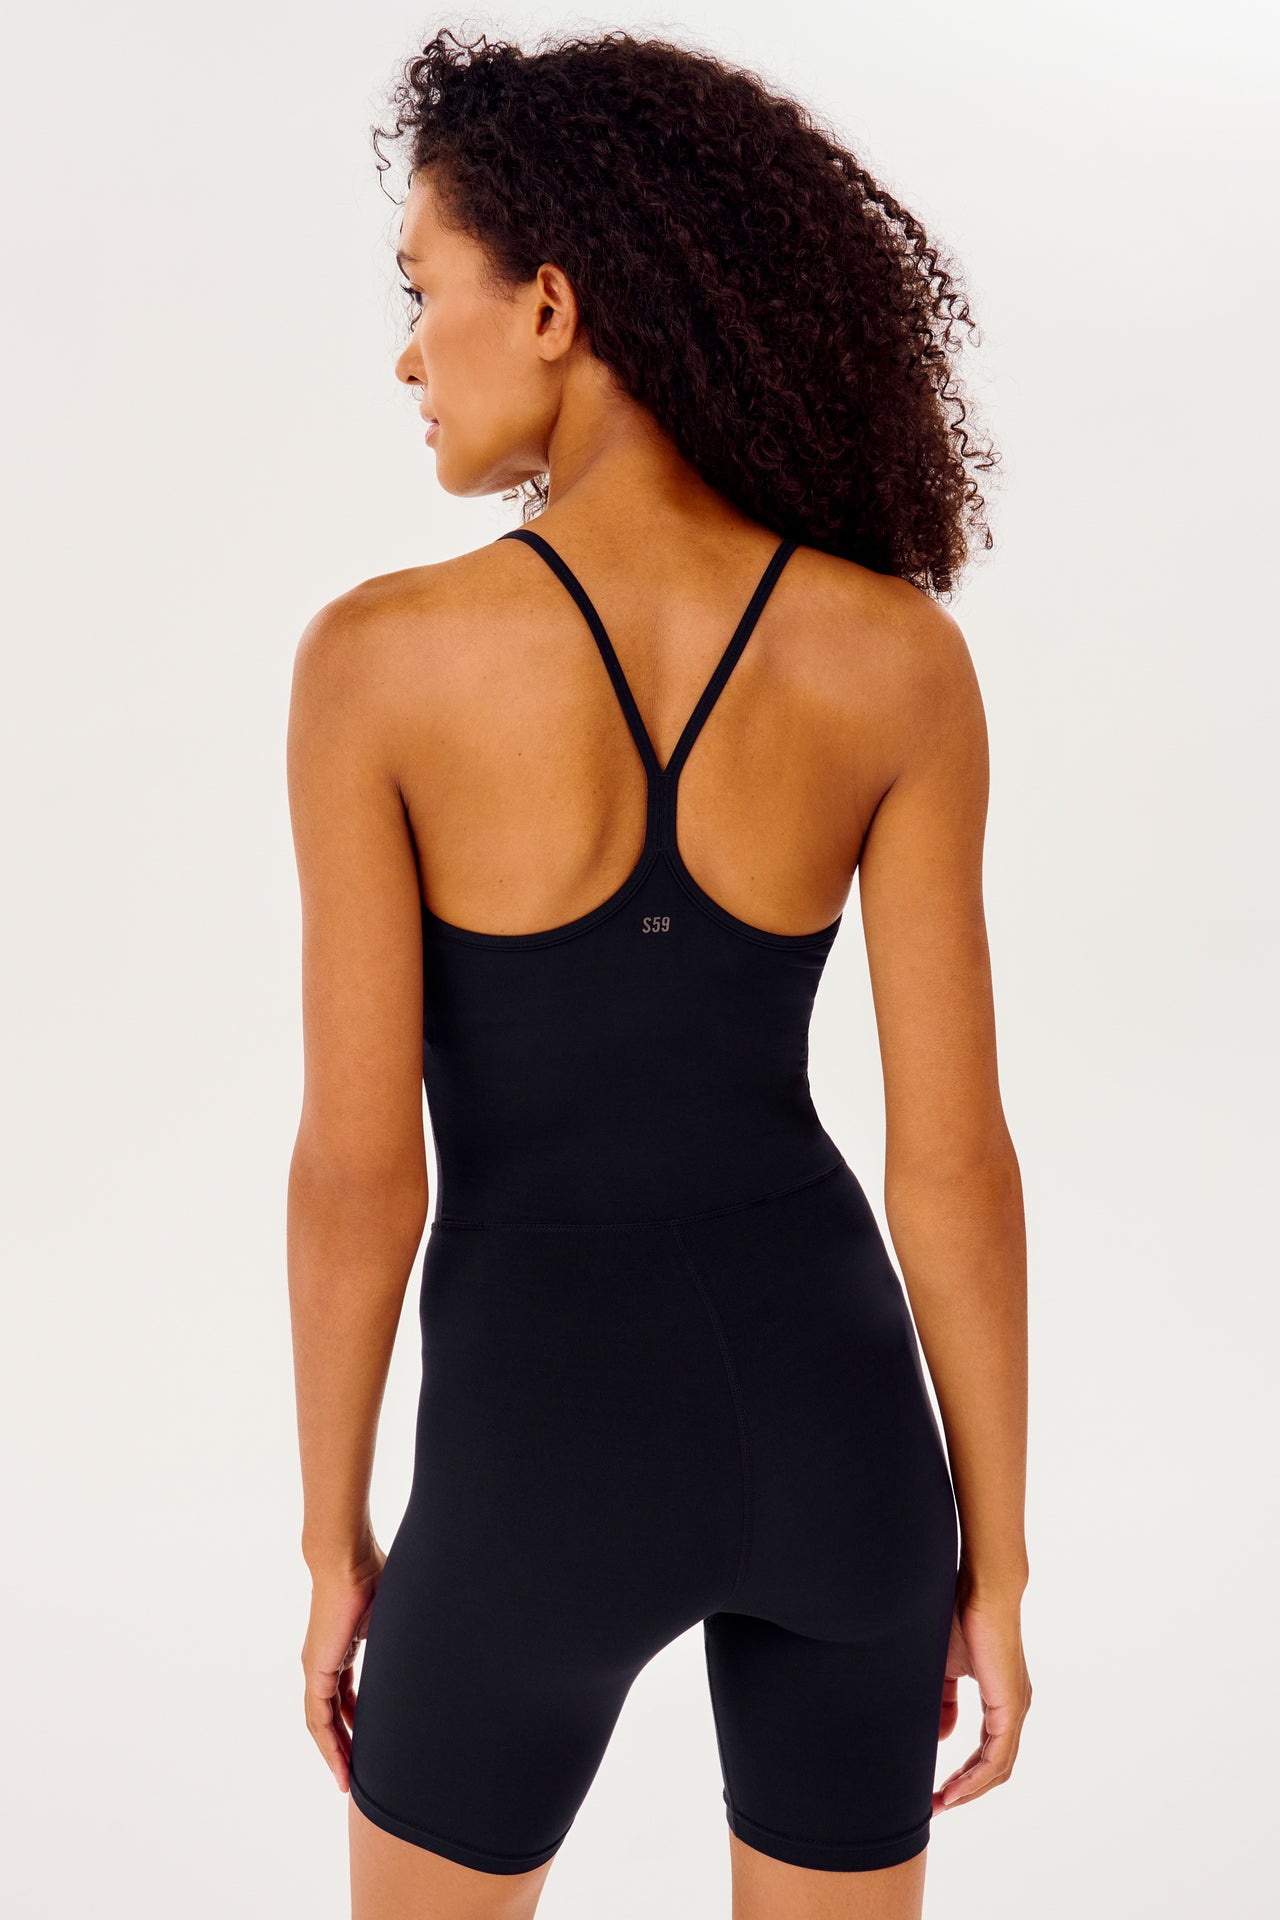 Half back view of black mid thigh spaghetti strap body suit/one piece